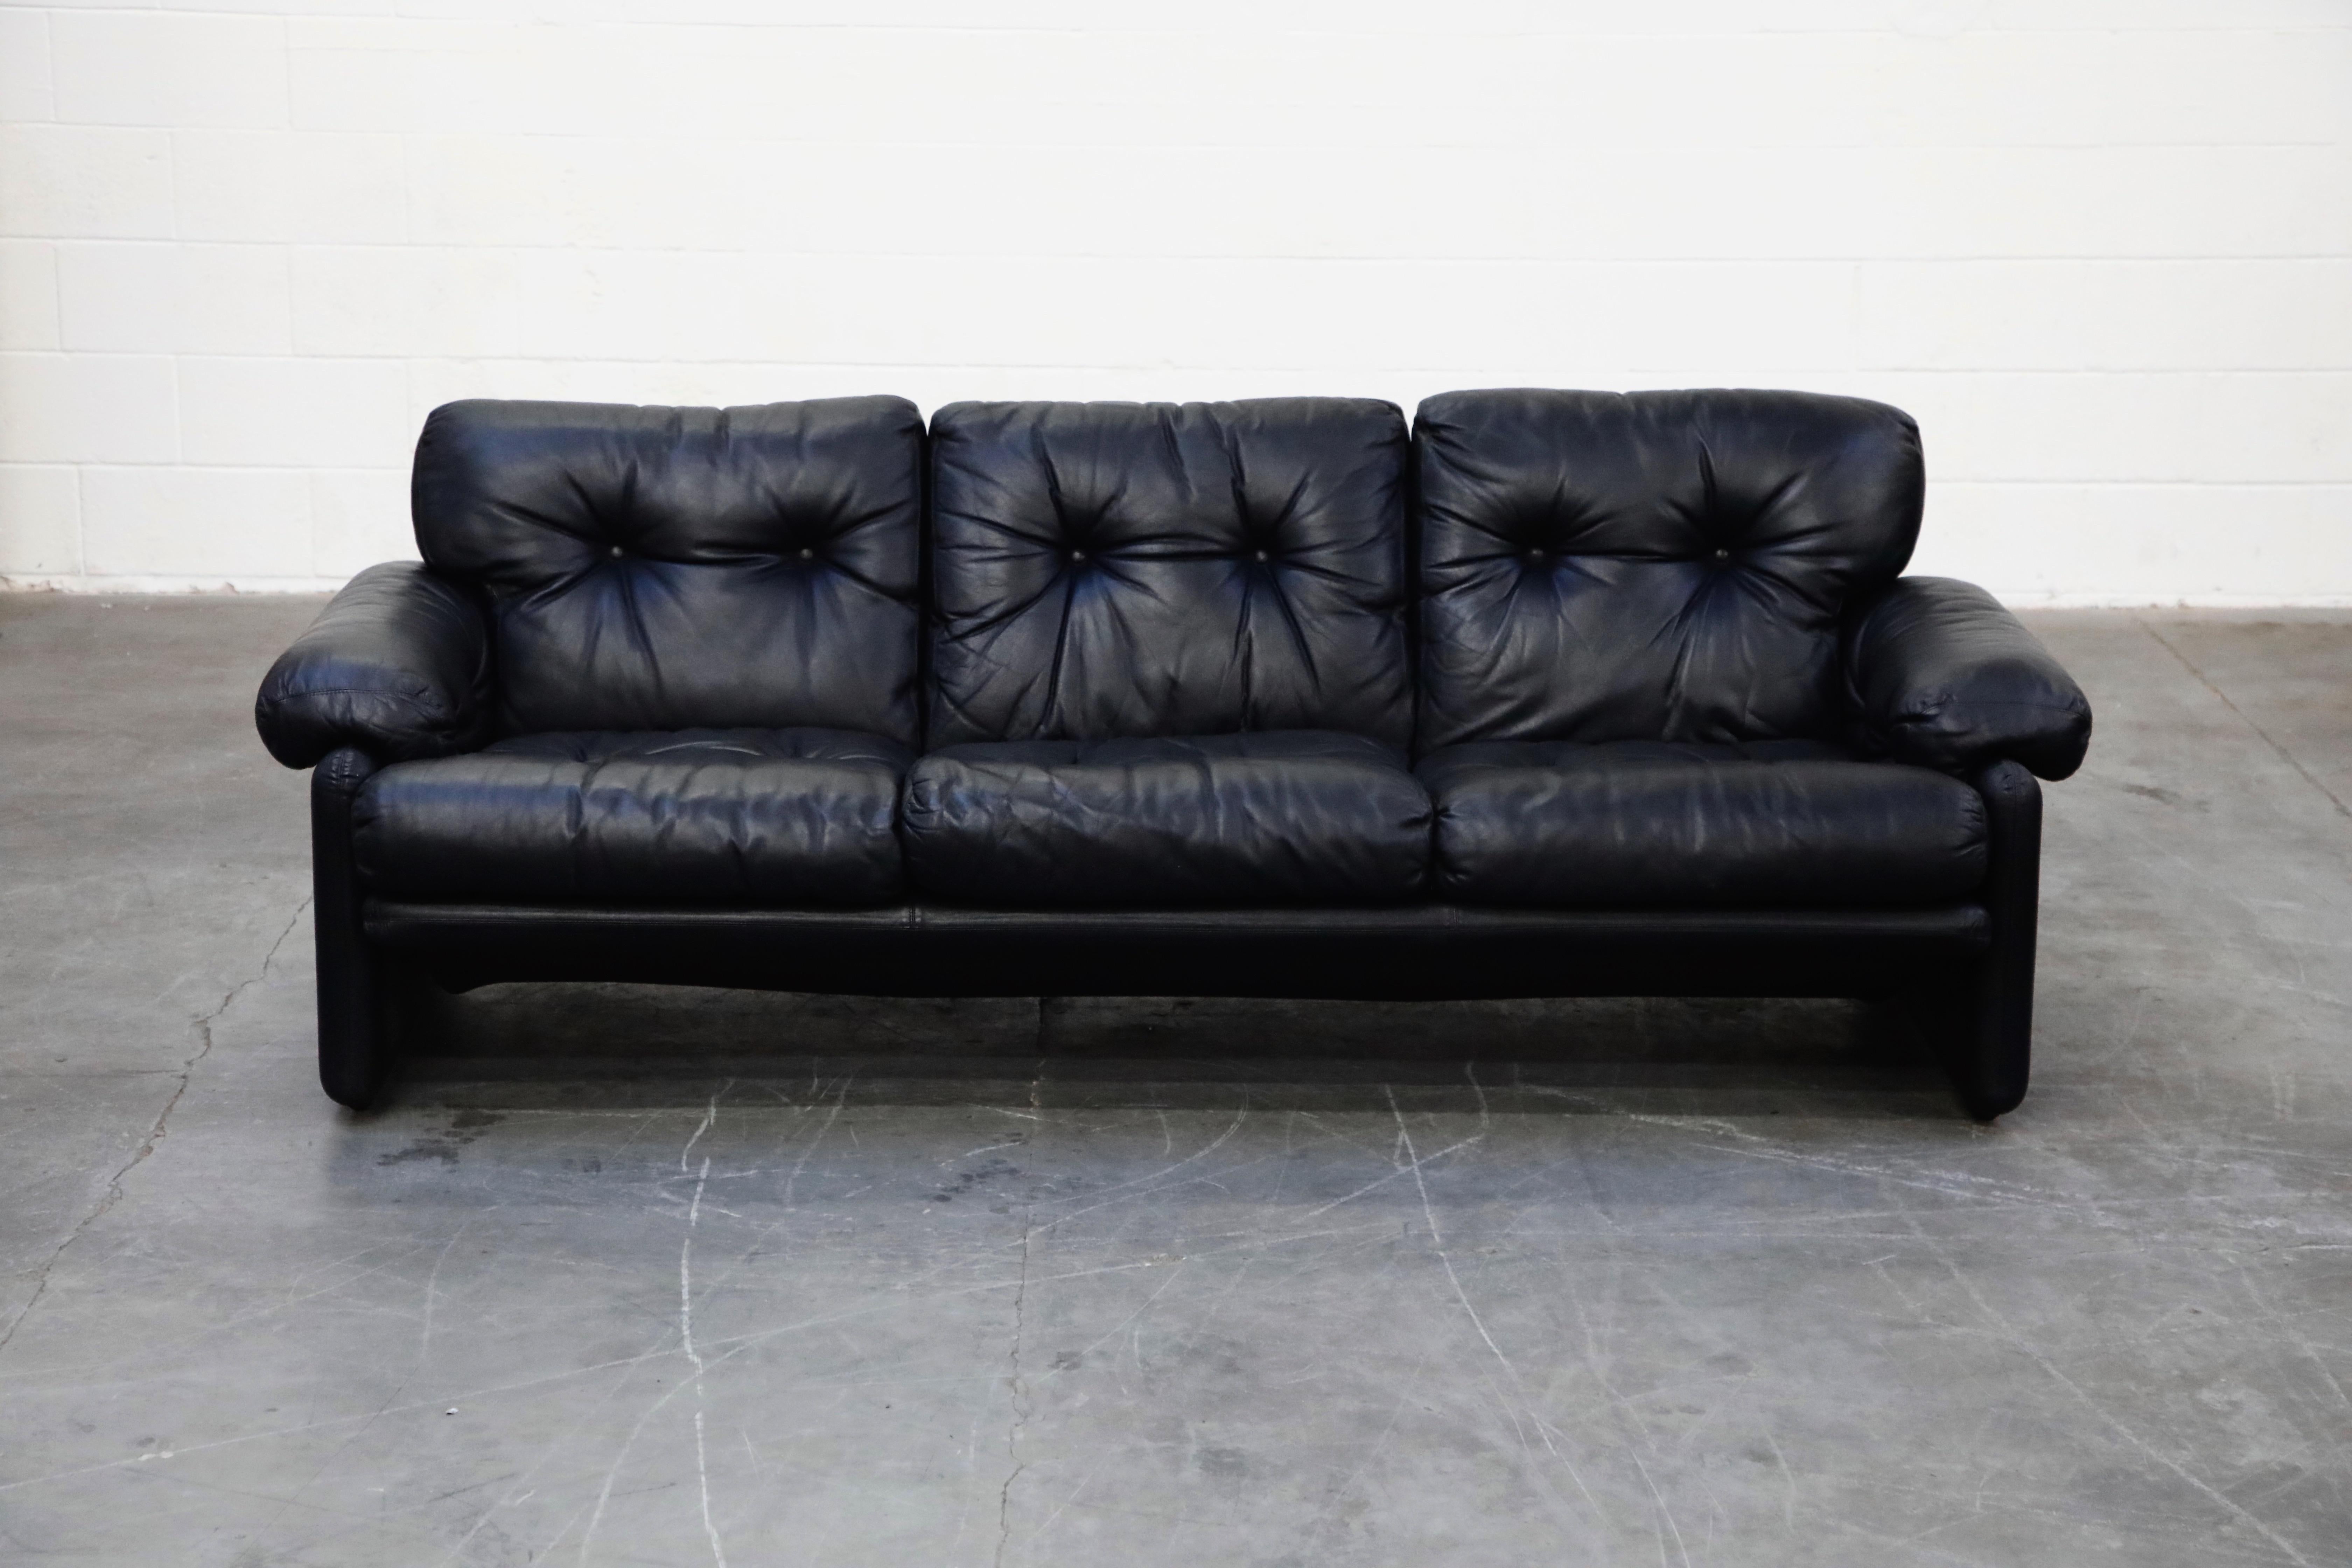 This cool, laid back yet refined three-seat 'Coronado' black leather sofa is by Afra and Tobia Scarpa for B & B Italia. Signed with original B&B Italia label and all original black leather - this is a perfect option for interior designer client,